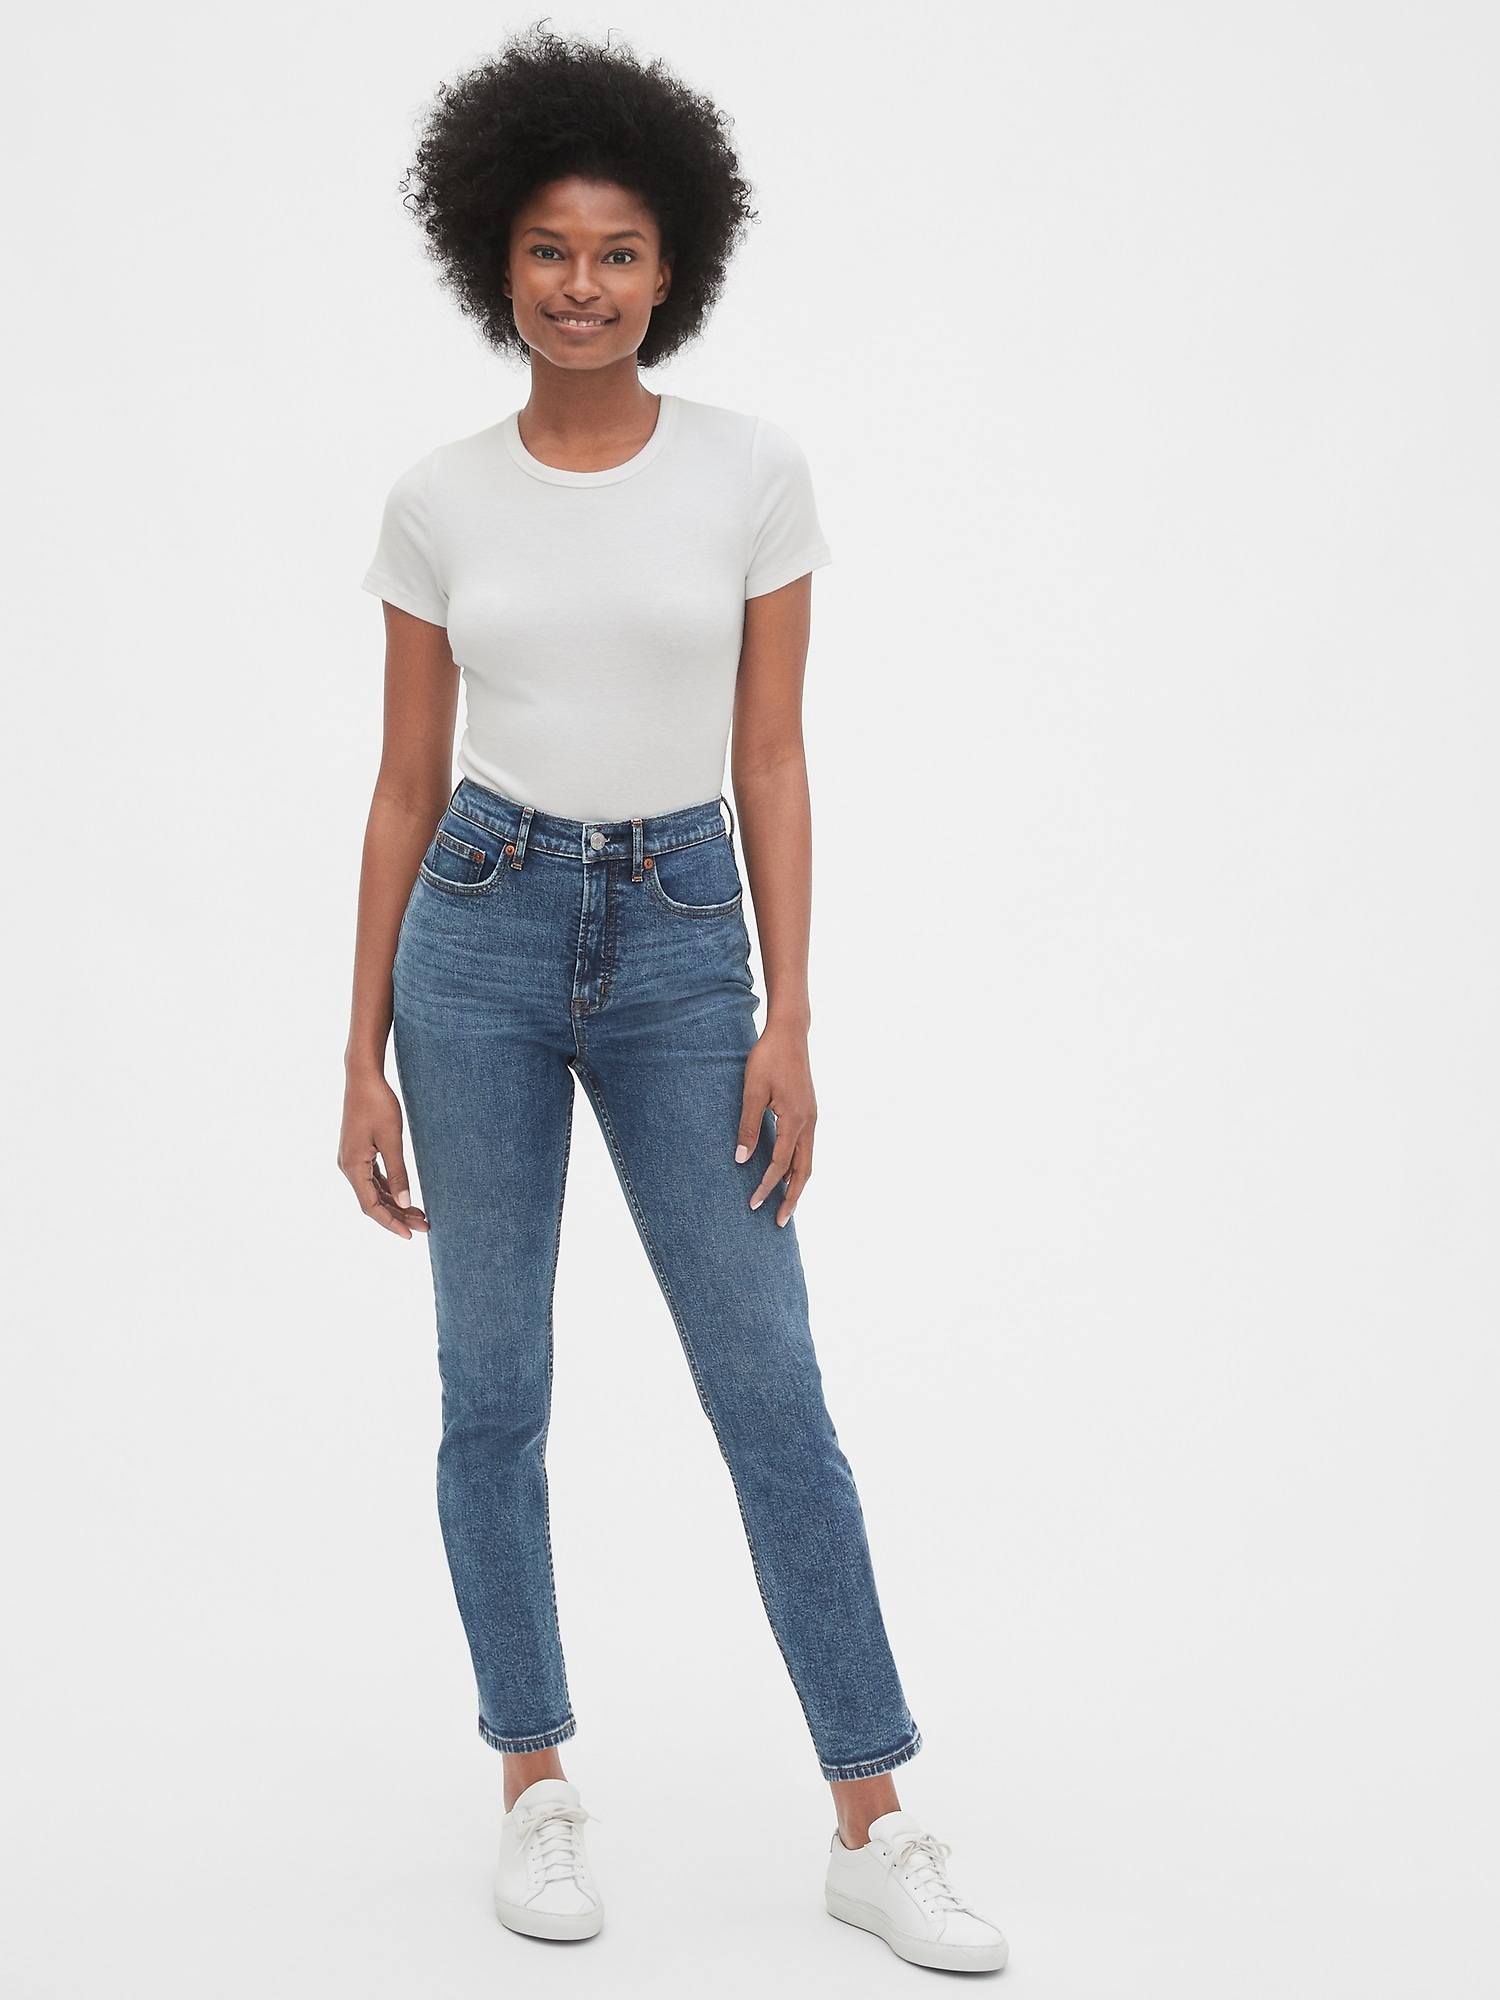 High Rise Cigarette Jeans with Secret Smoothing Pockets | Gap